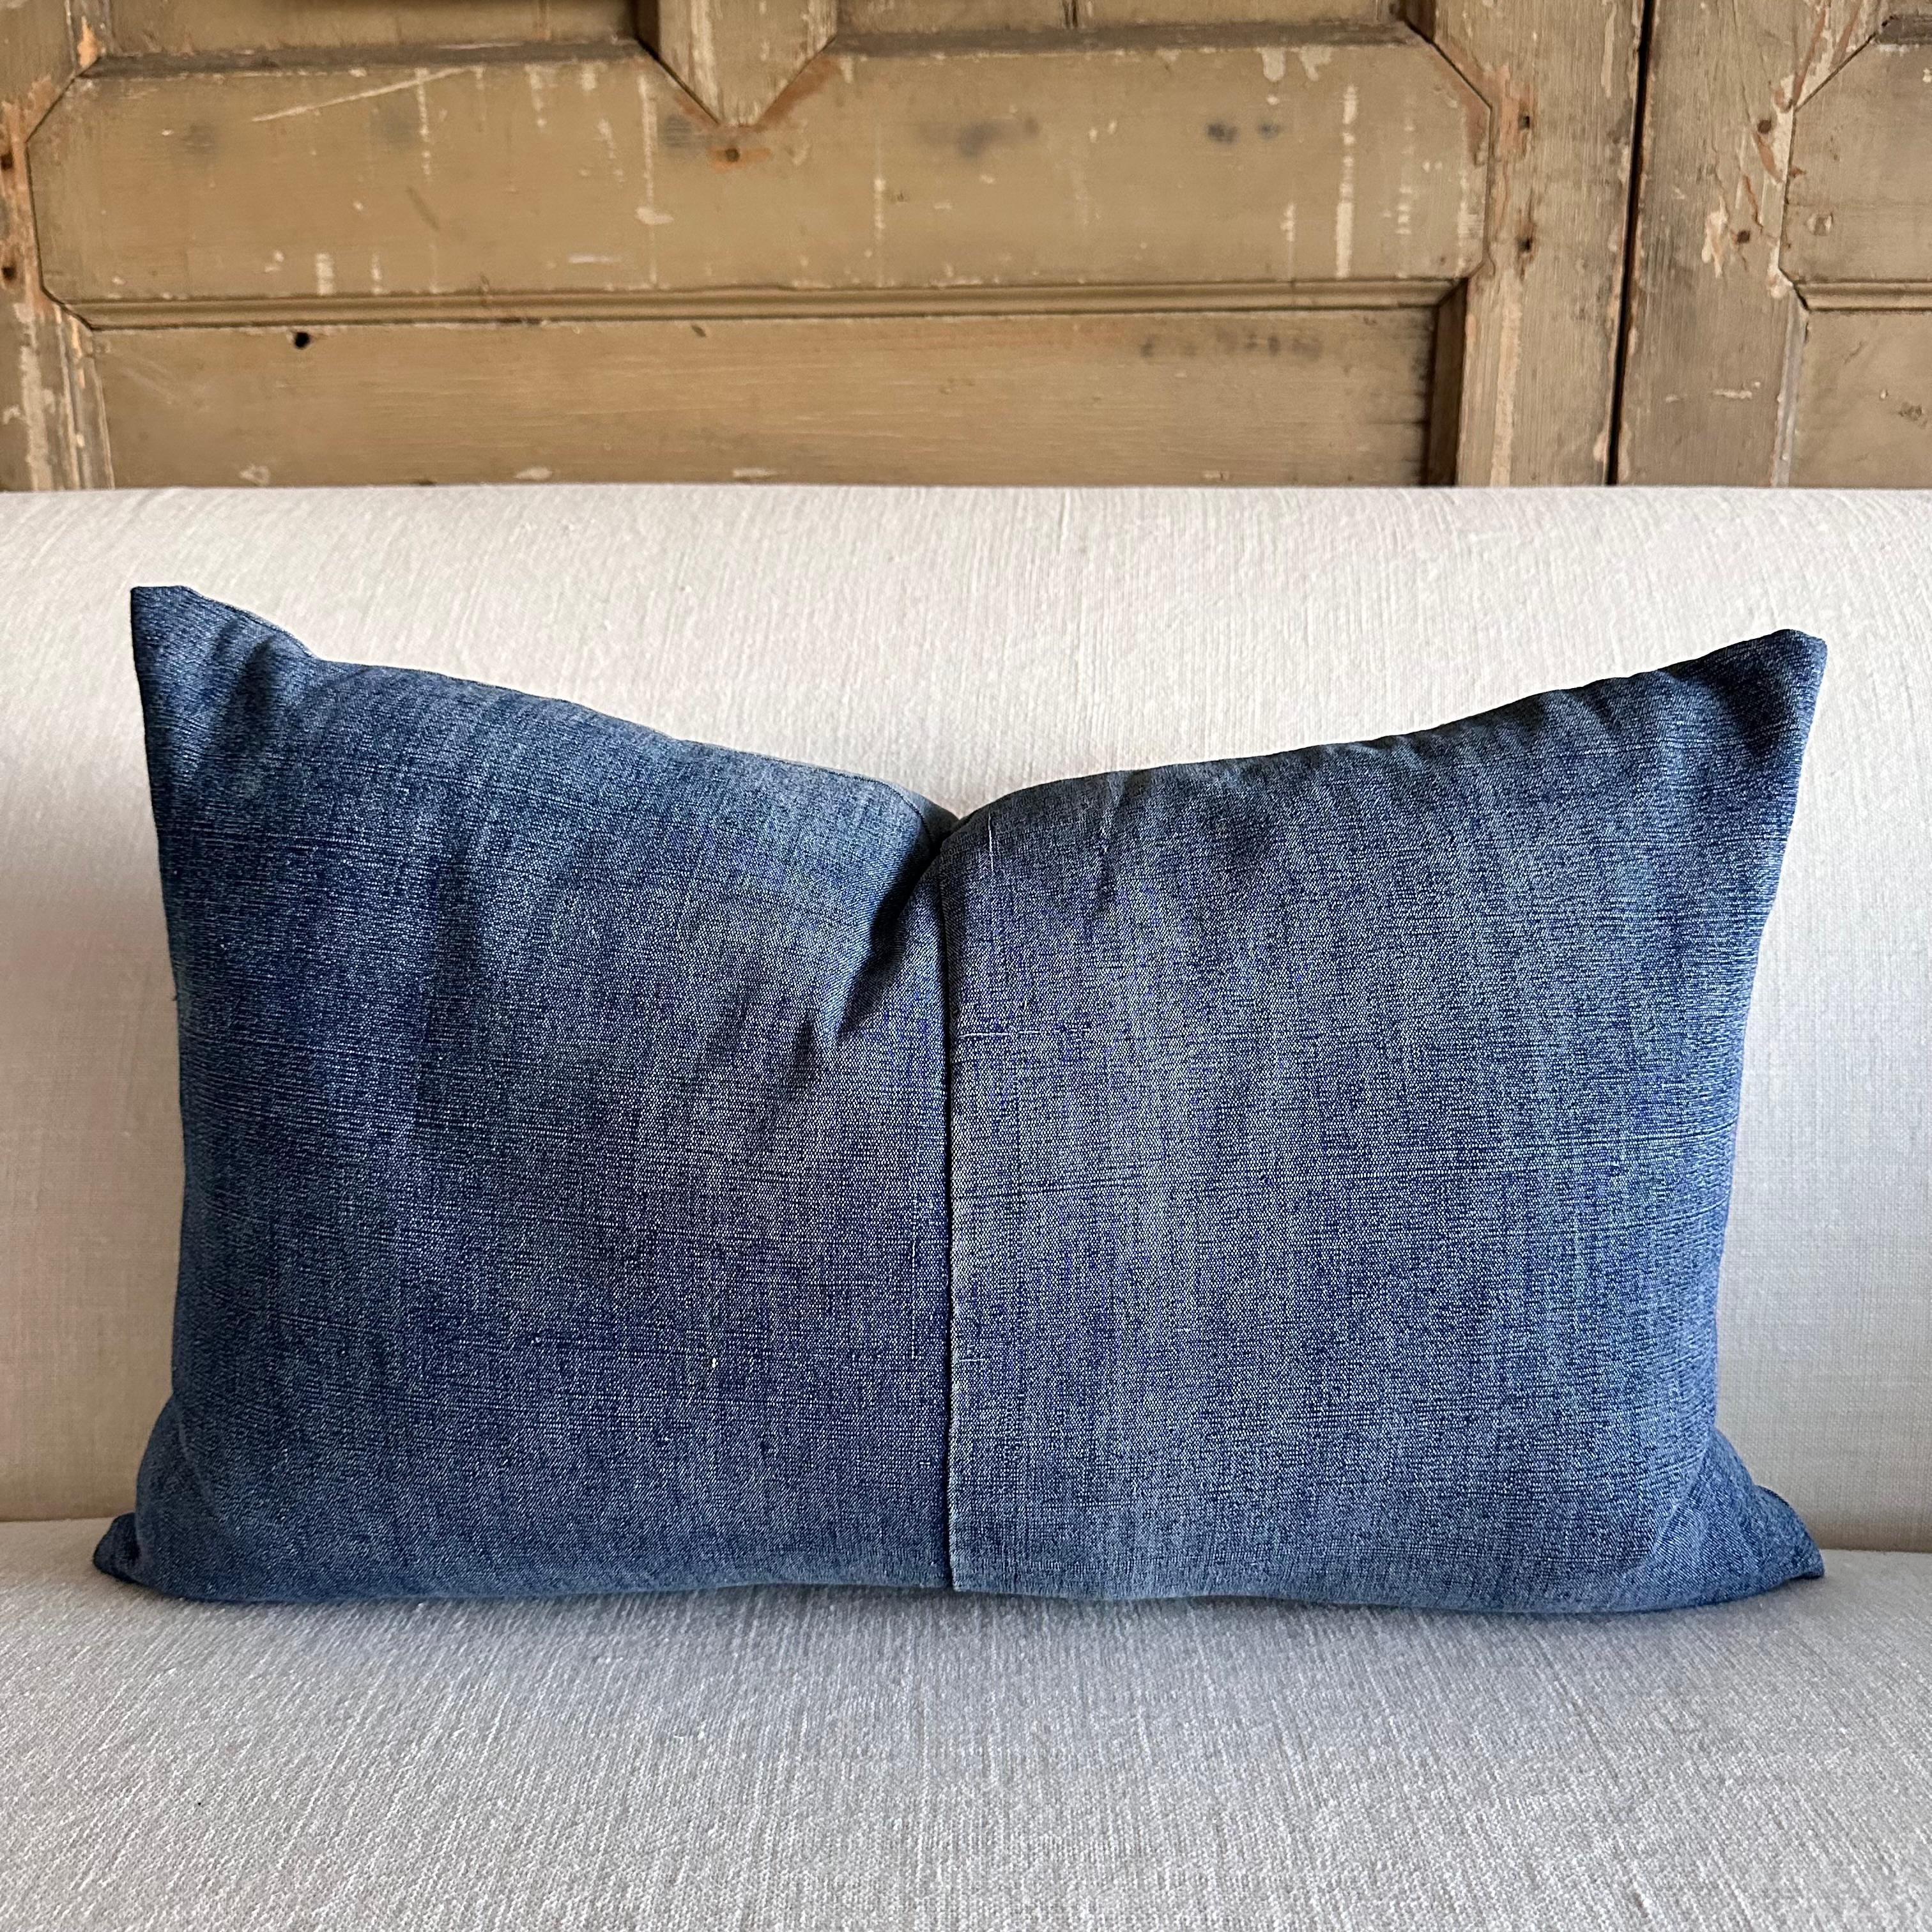 Japanese Blue Woven Denim Style Lumbar Pillow In New Condition For Sale In Brea, CA